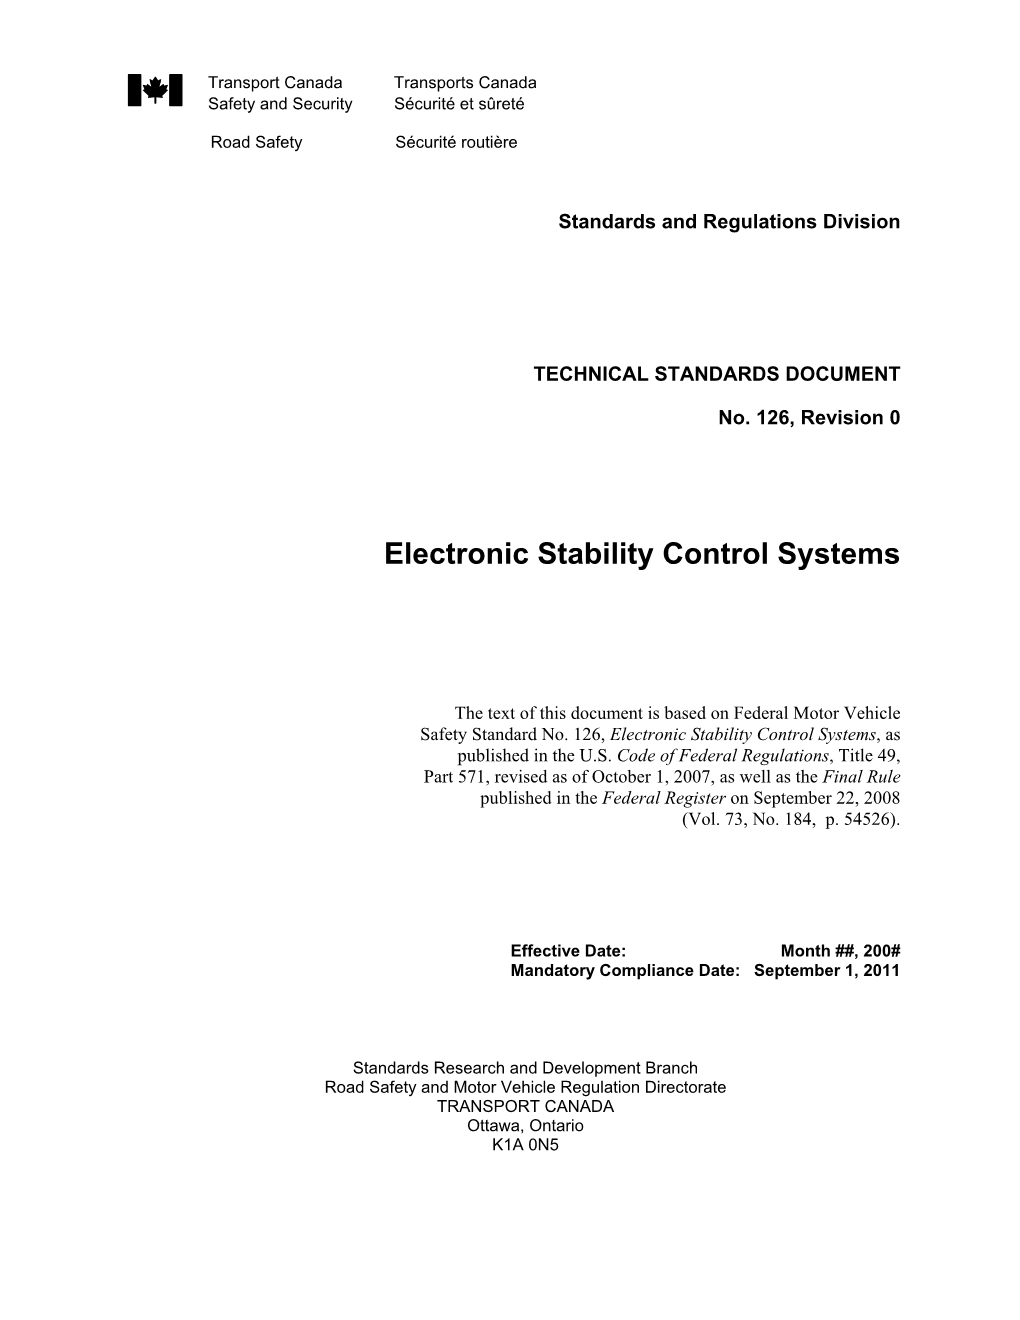 Electronic Stability Control Systems